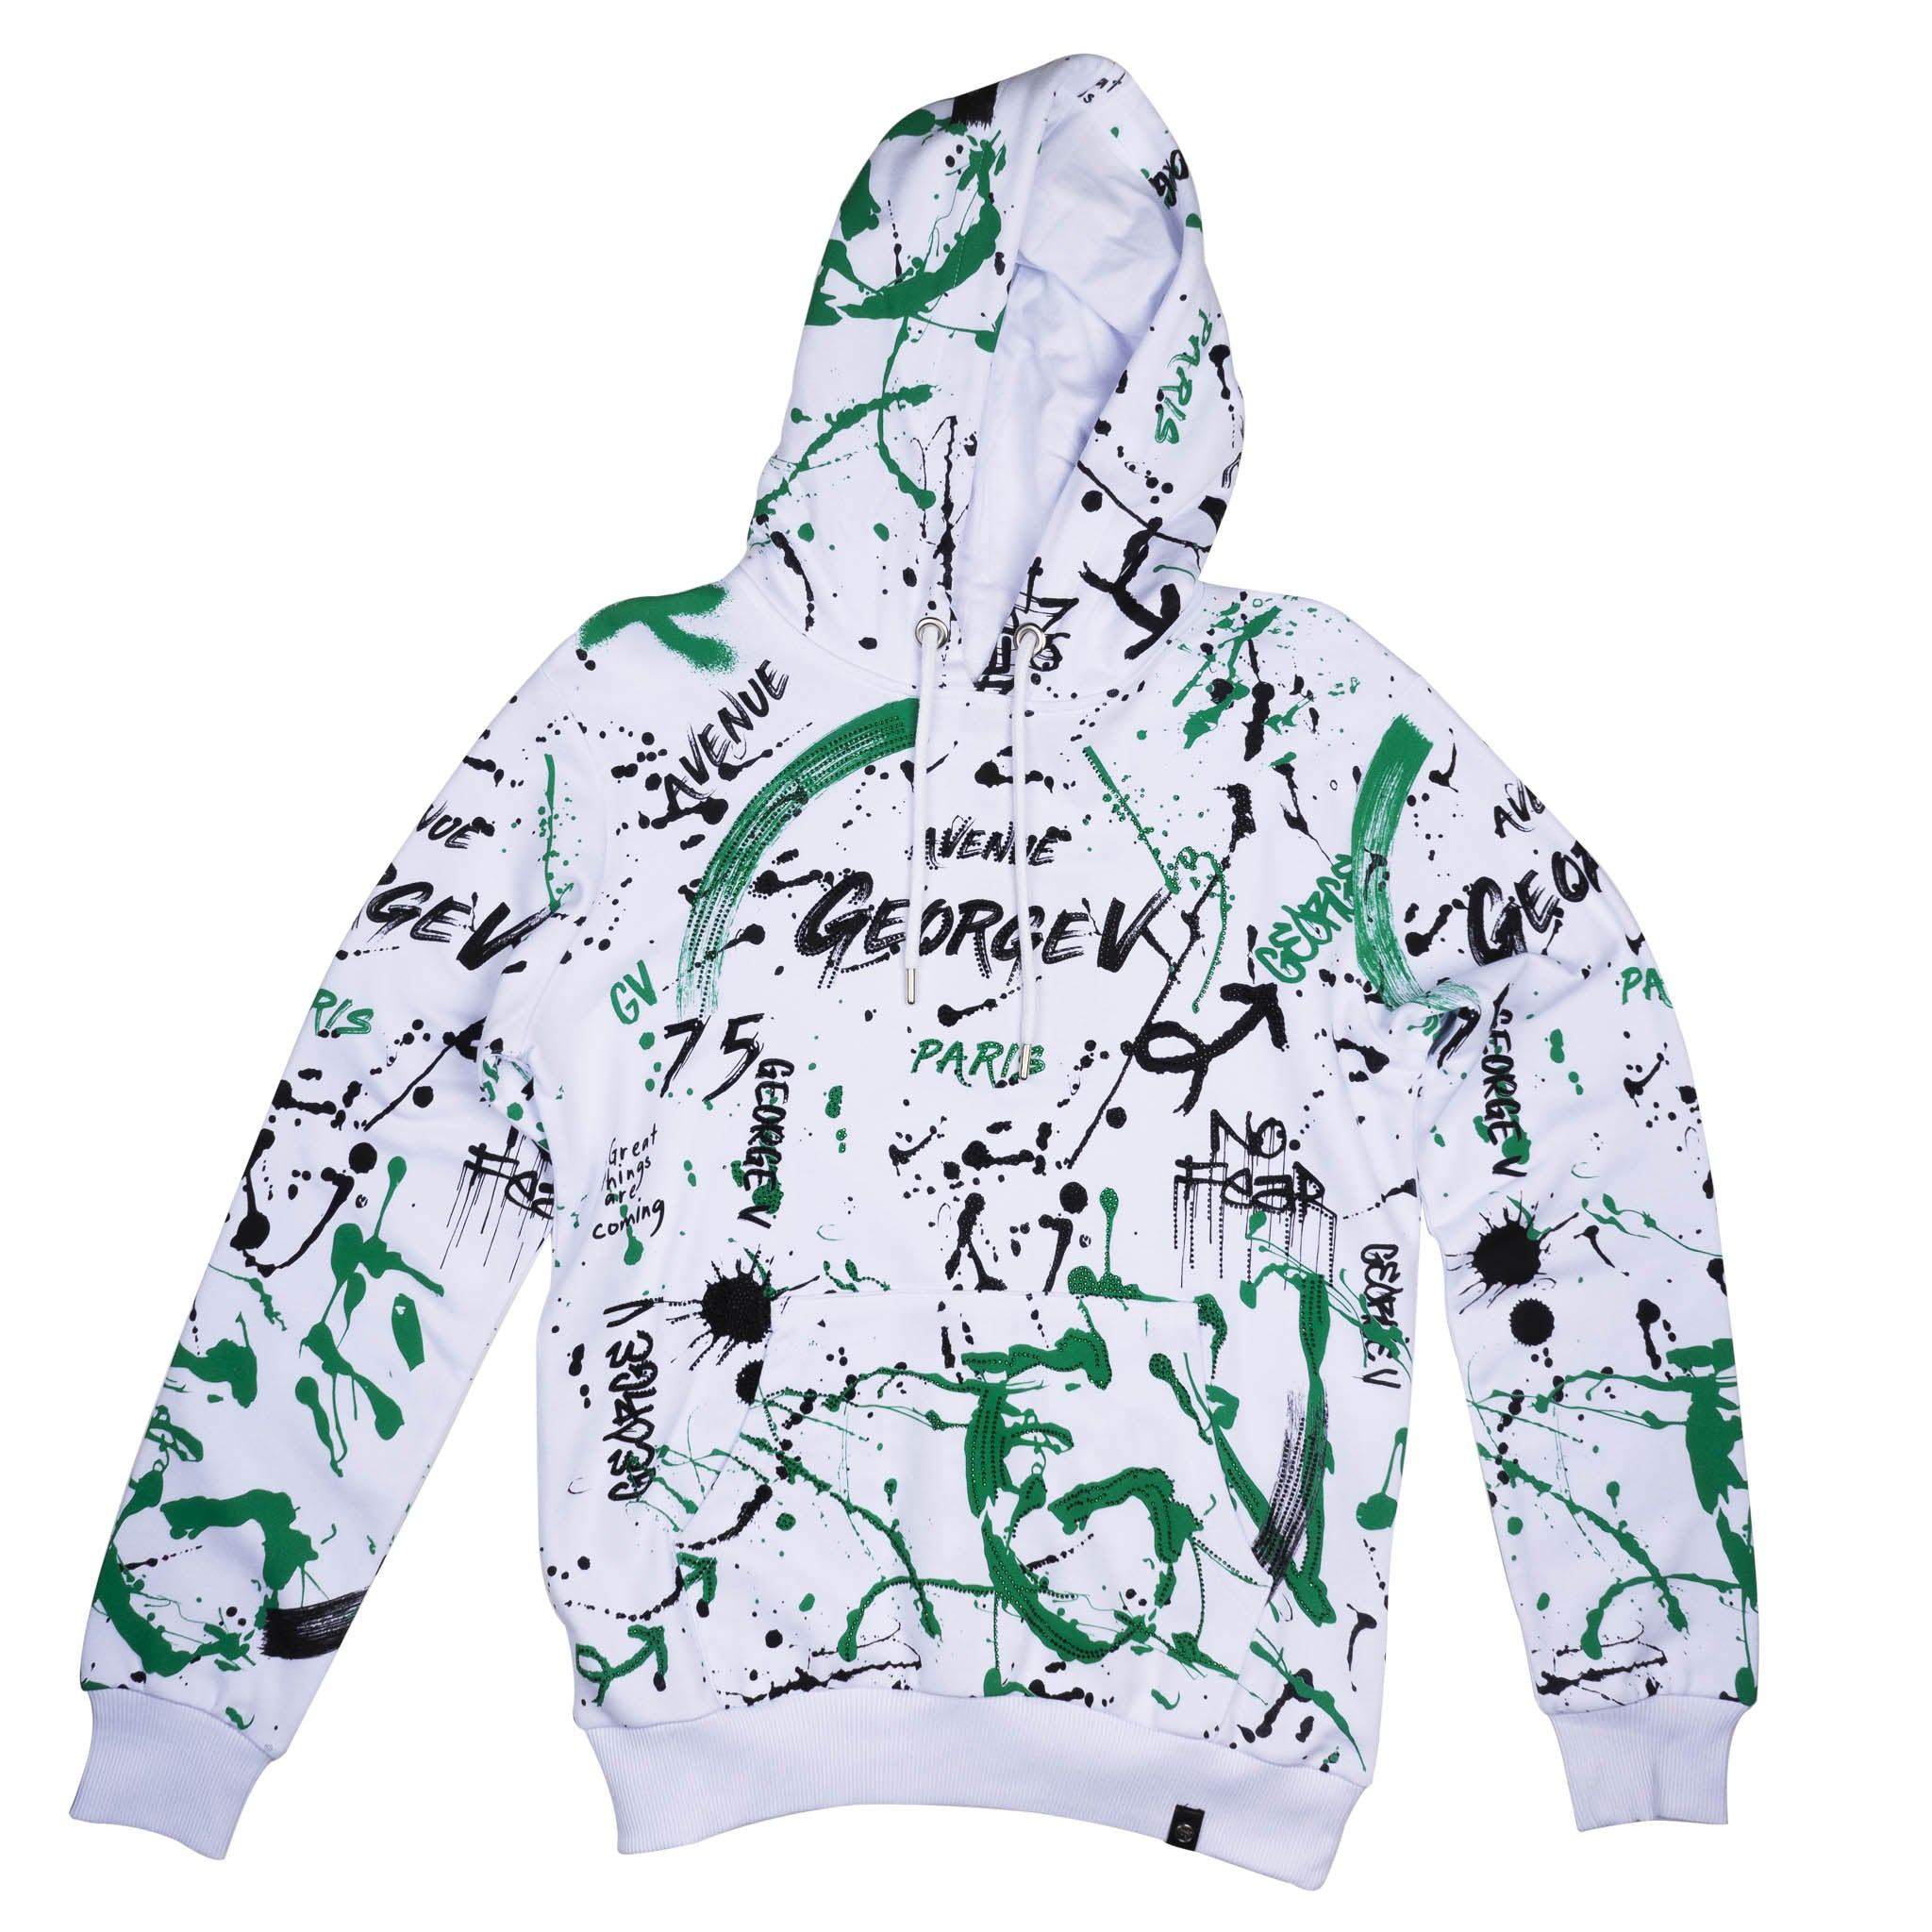 GEORGE V PAINT SPLATTERED BEDAZZLED HOODIE WHITE/GREEN - GV-2419